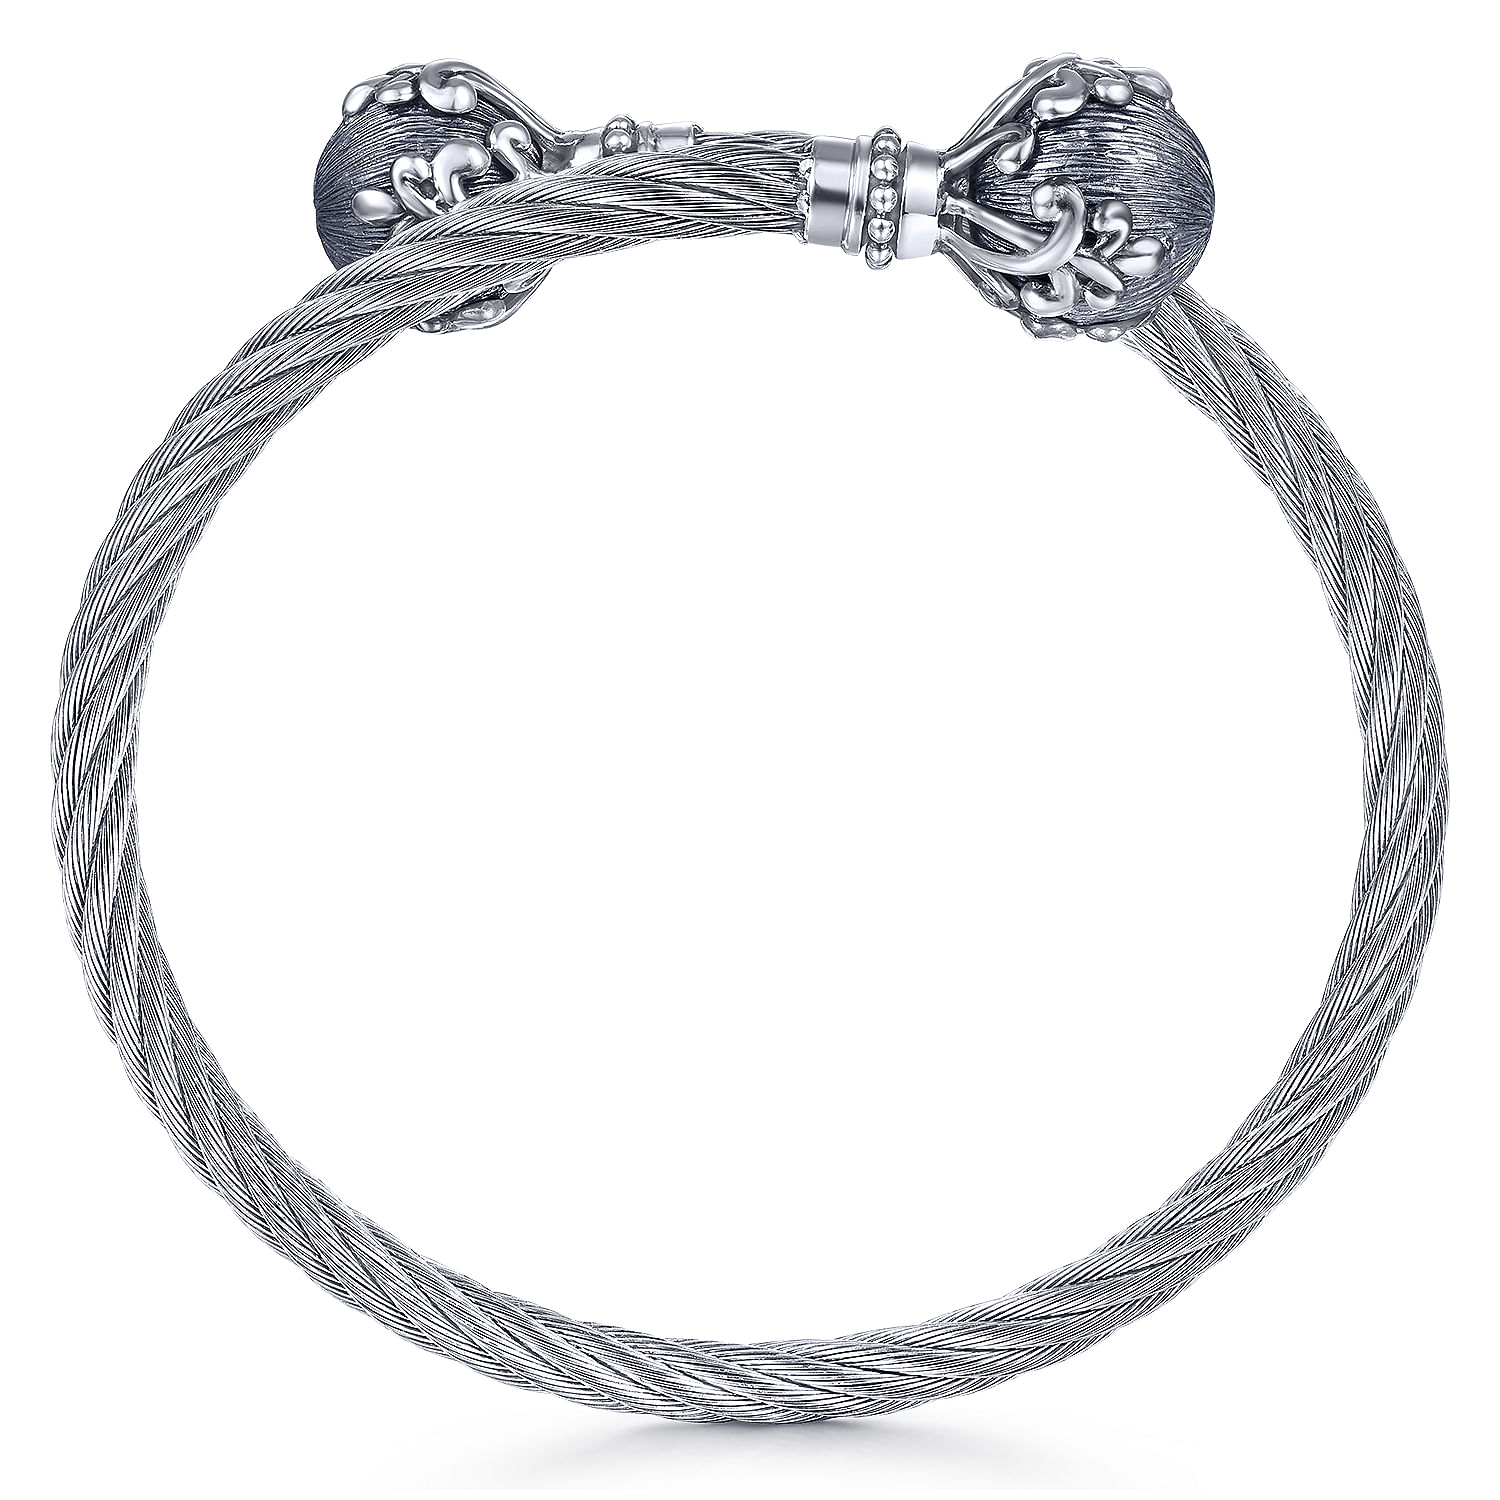 925 Sterling Silver and Twisted Cable Stainless Steel Bypass Bangle with Floral Detail